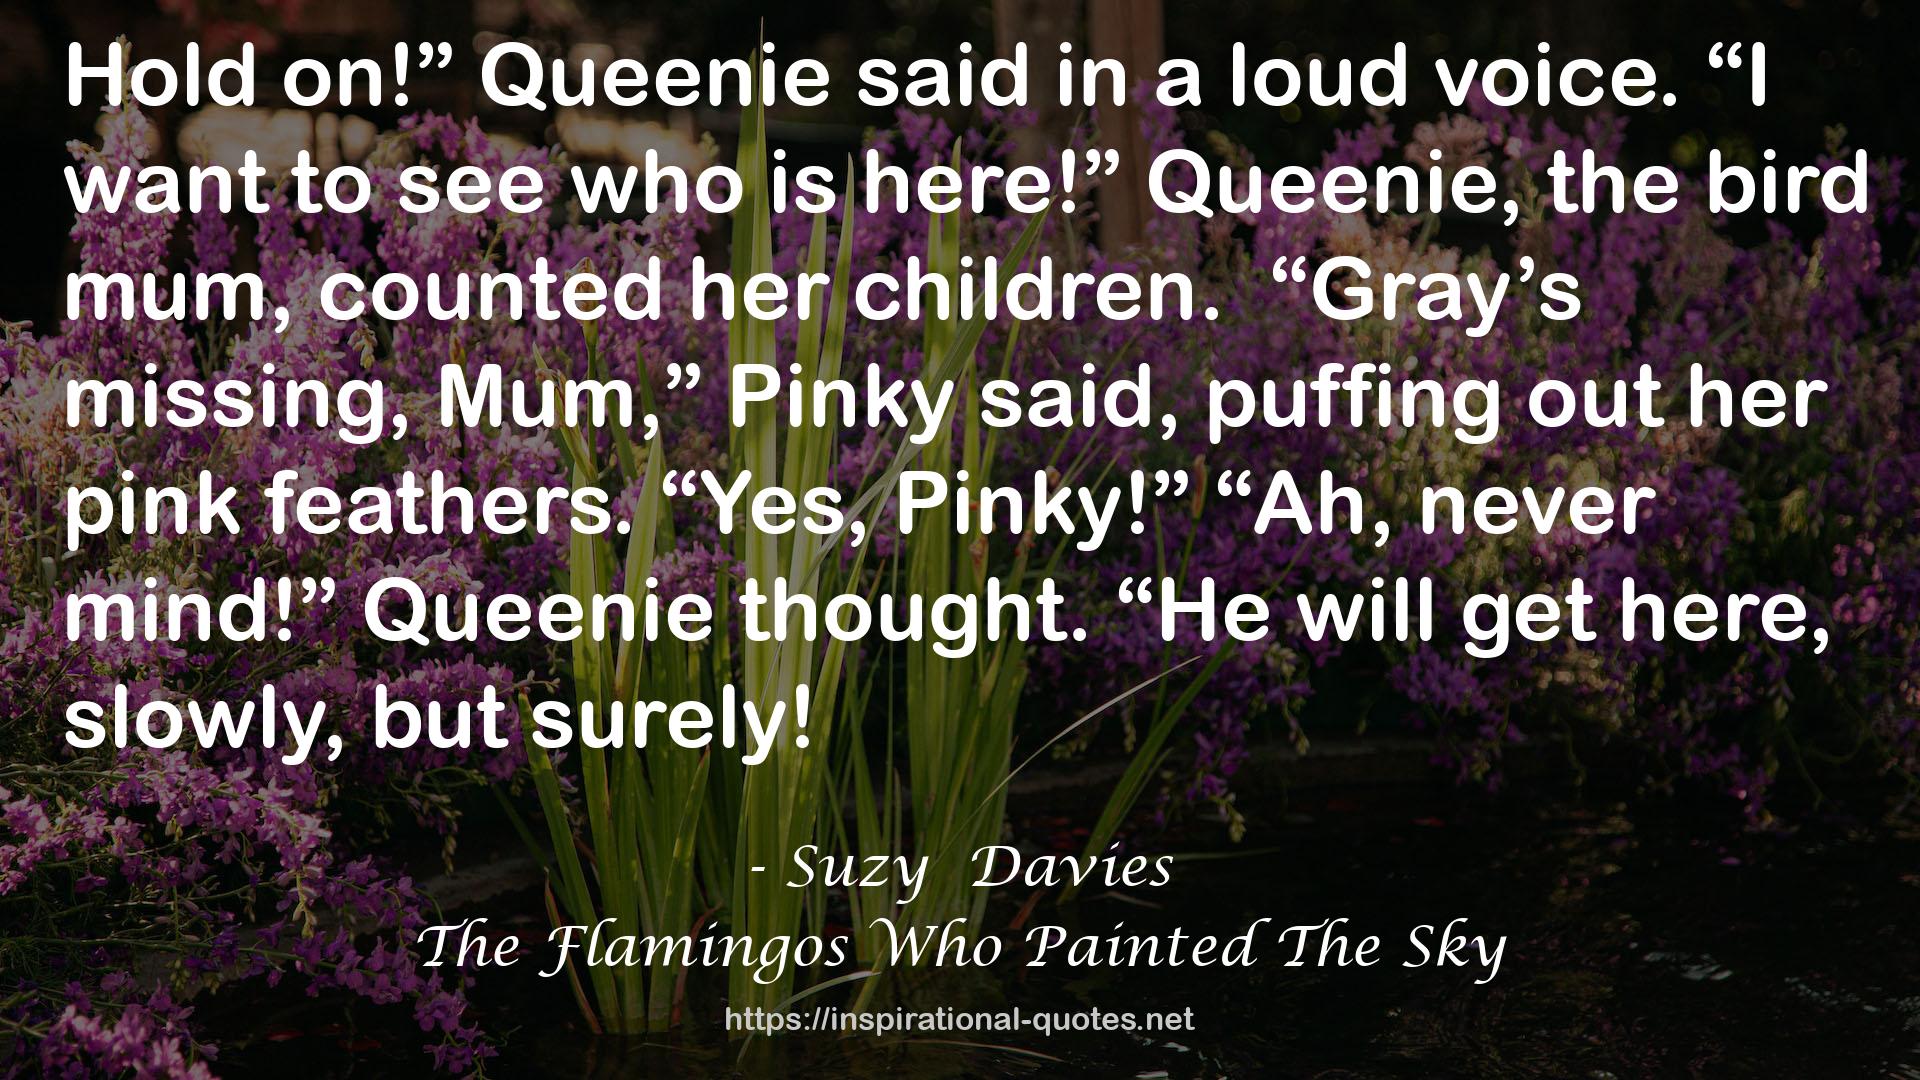 The Flamingos Who Painted The Sky QUOTES